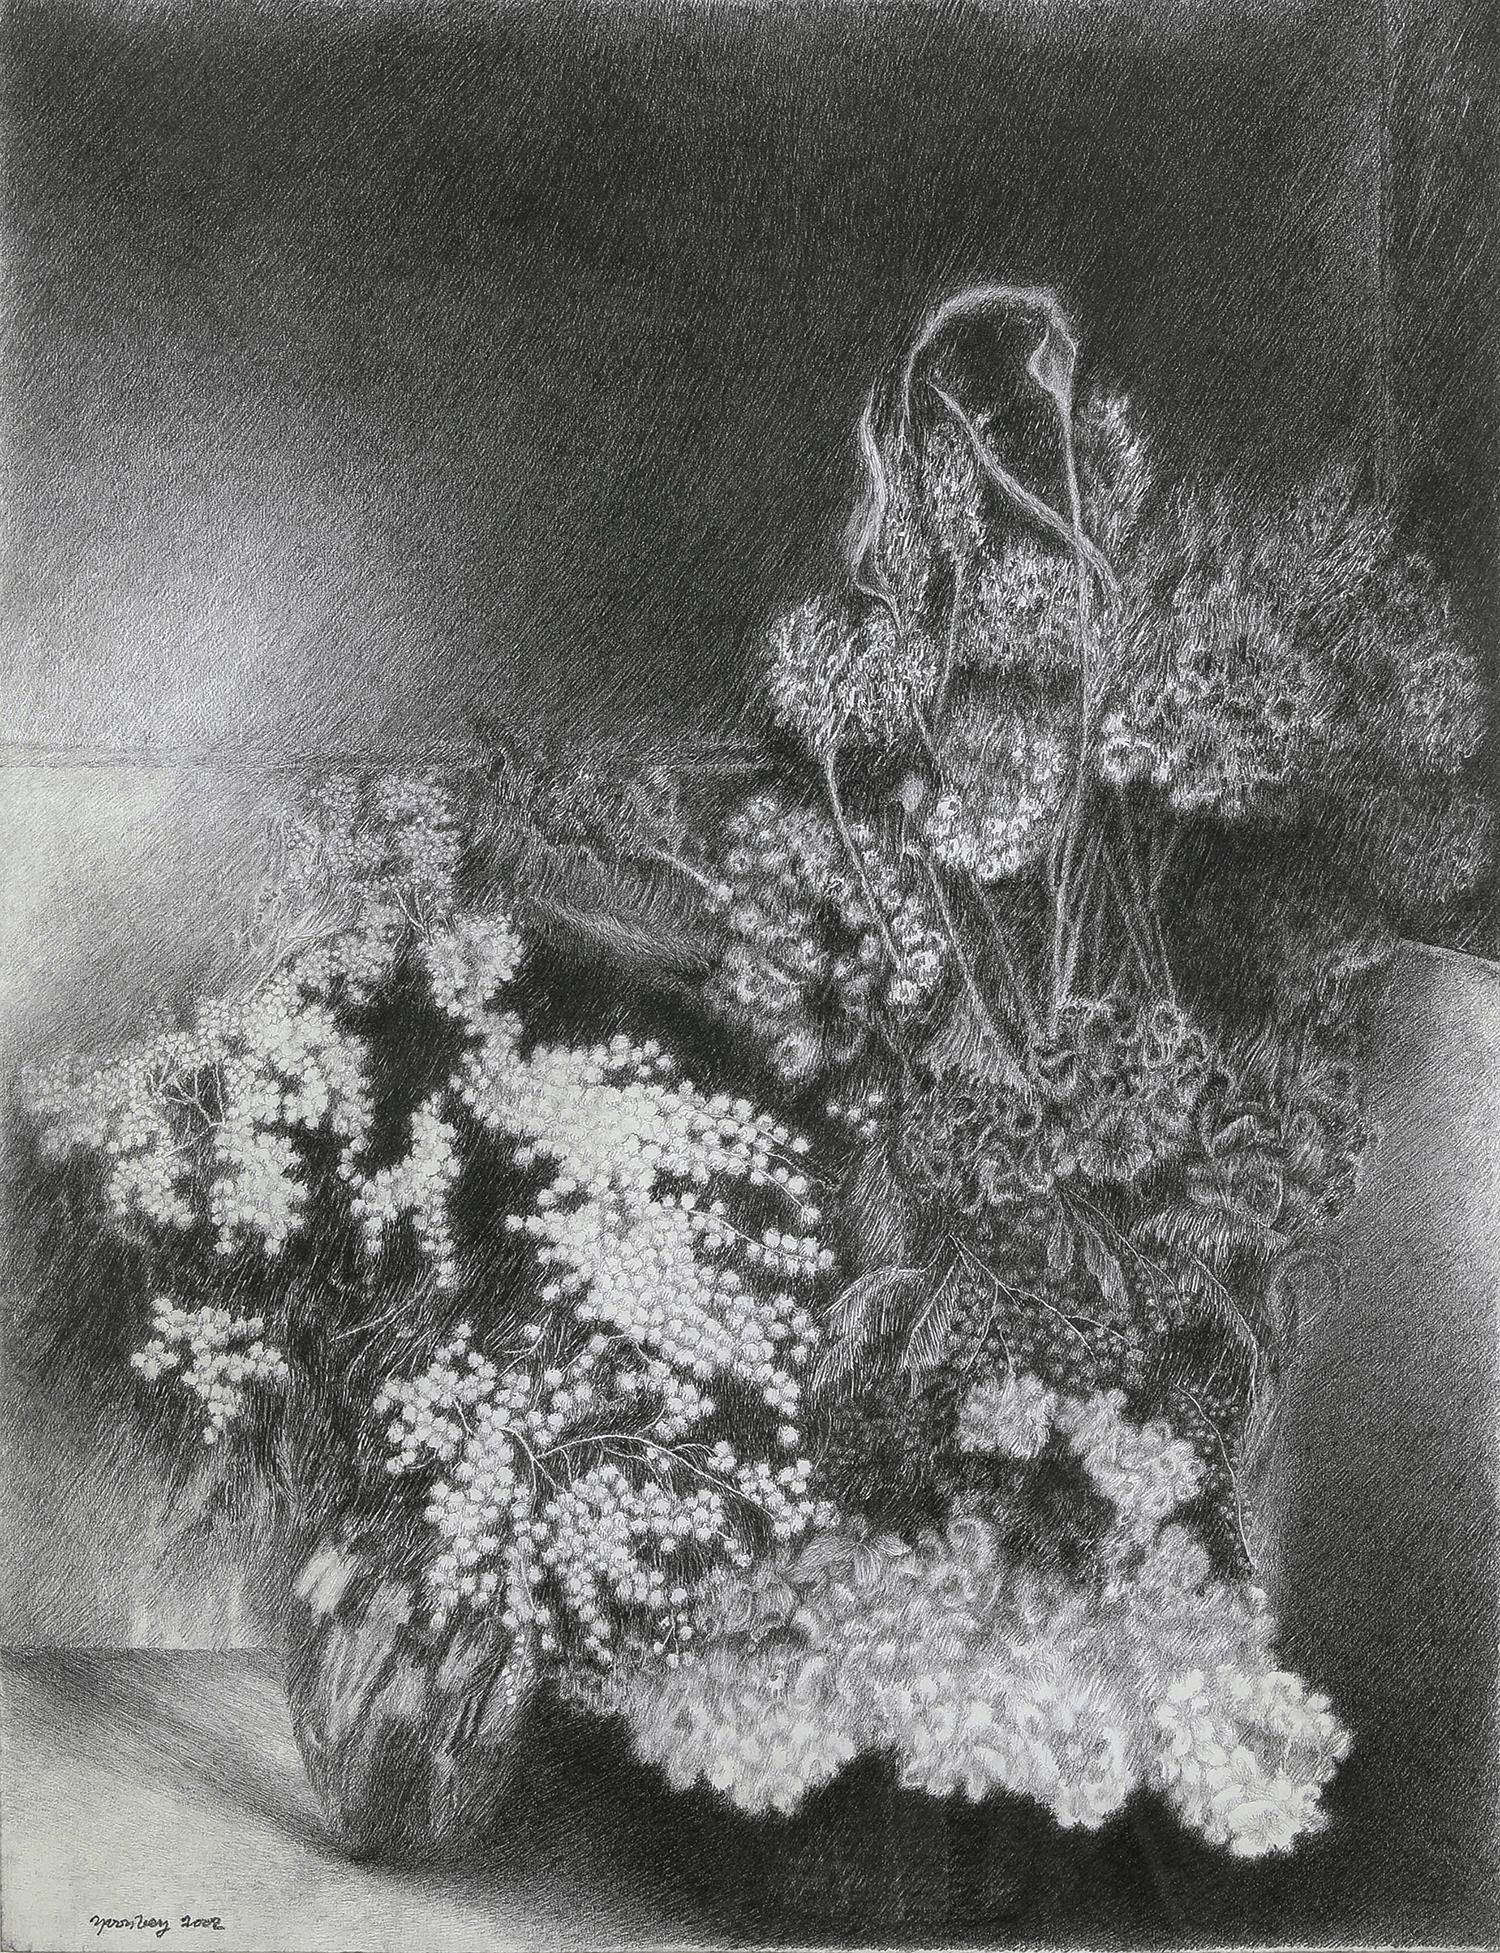 Mimosas by Yvon Pissarro (b. 1937)
Graphite on paper
65 x 50 cm (25 ⅝ x 19 ⅝ inches)
Signed and dated lower left Yvon Vey 2002

Provenance
Studio of the artist, Montpellier

Artist biography
The son of Paulémile and grandson of Camille Pissarro,